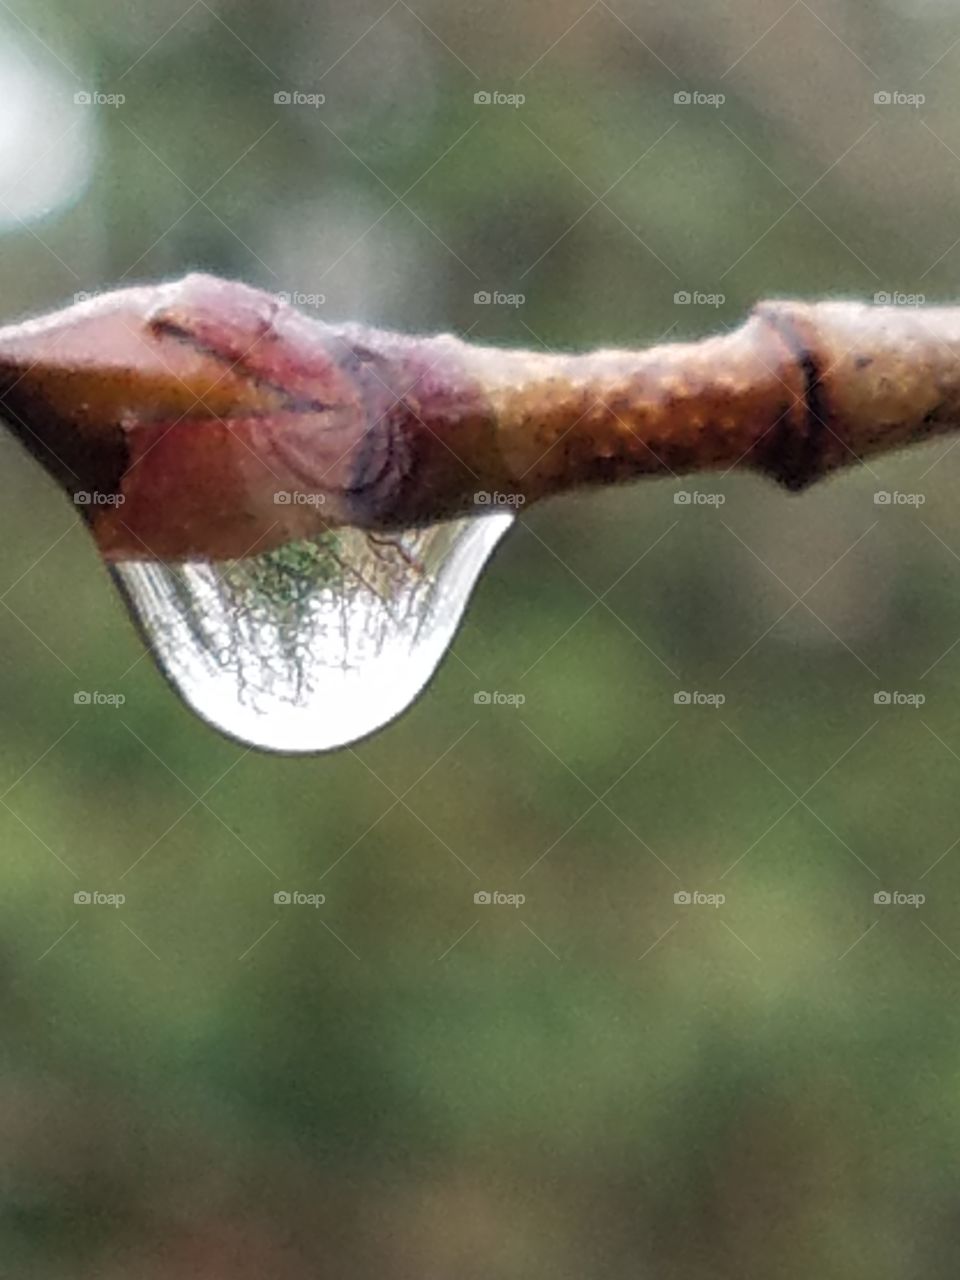 spring showers bring droplets and reflections